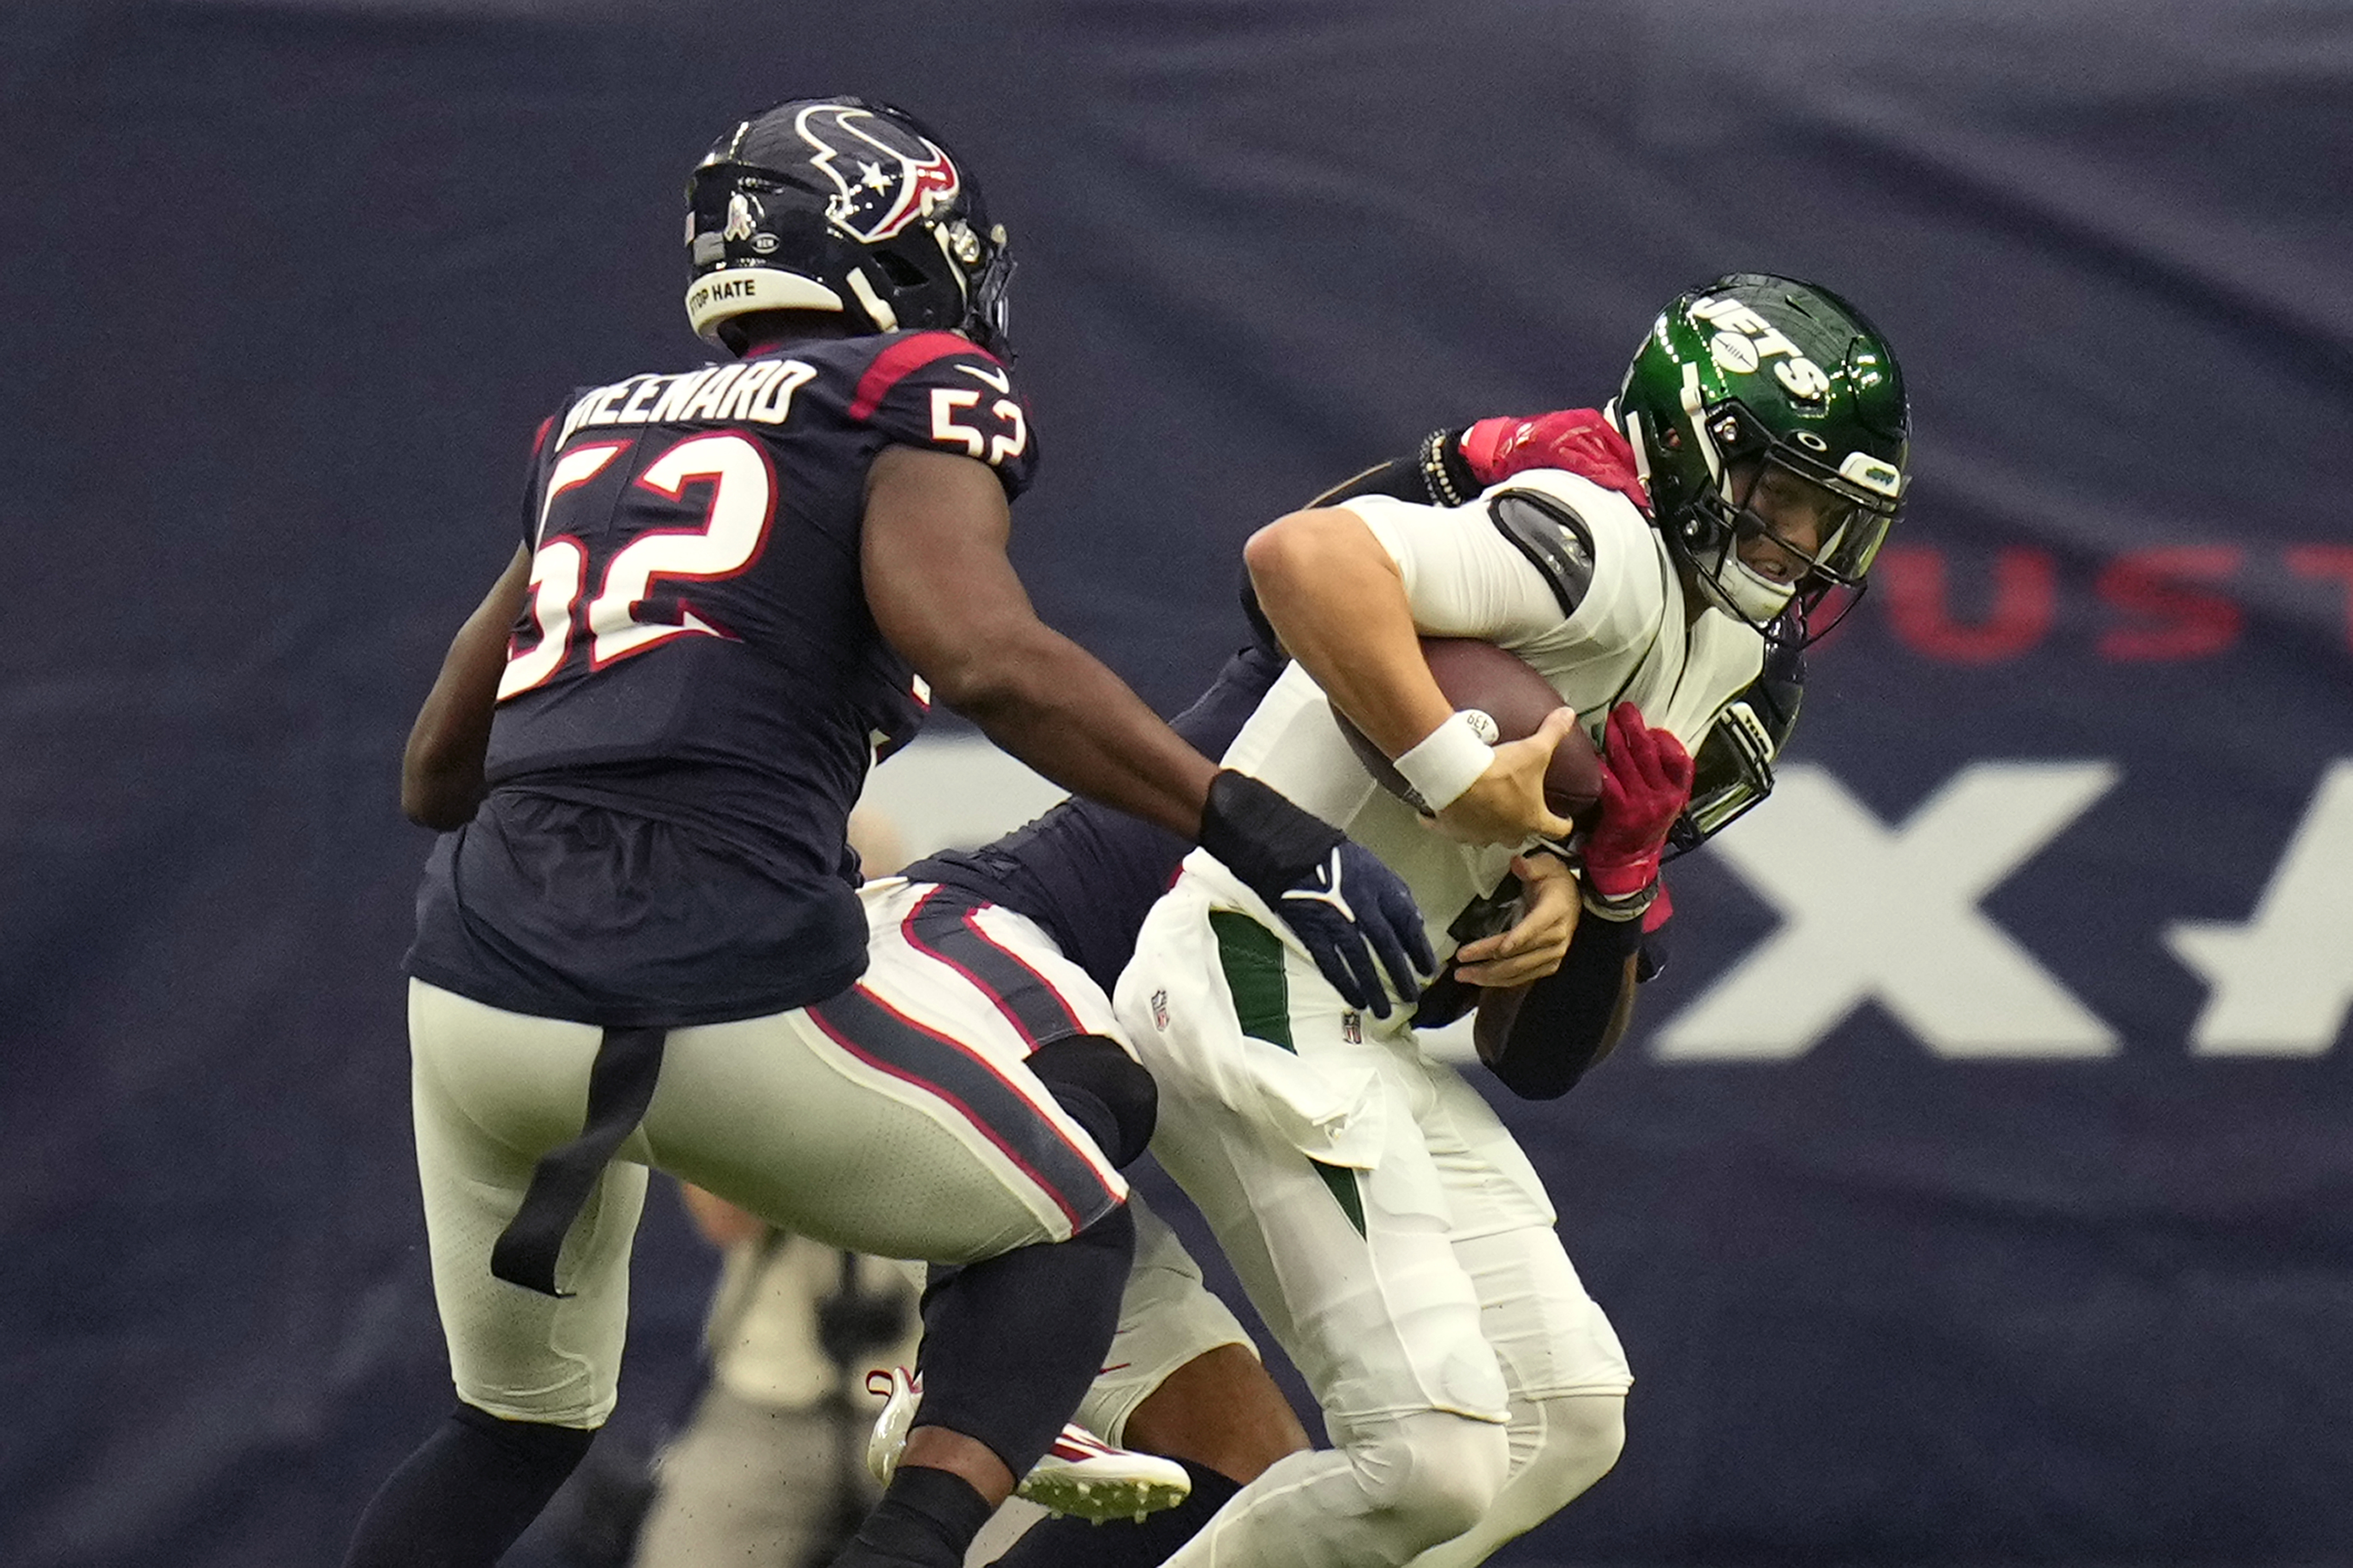 Wilson returns, Jets end skid with 21-14 win over Texans